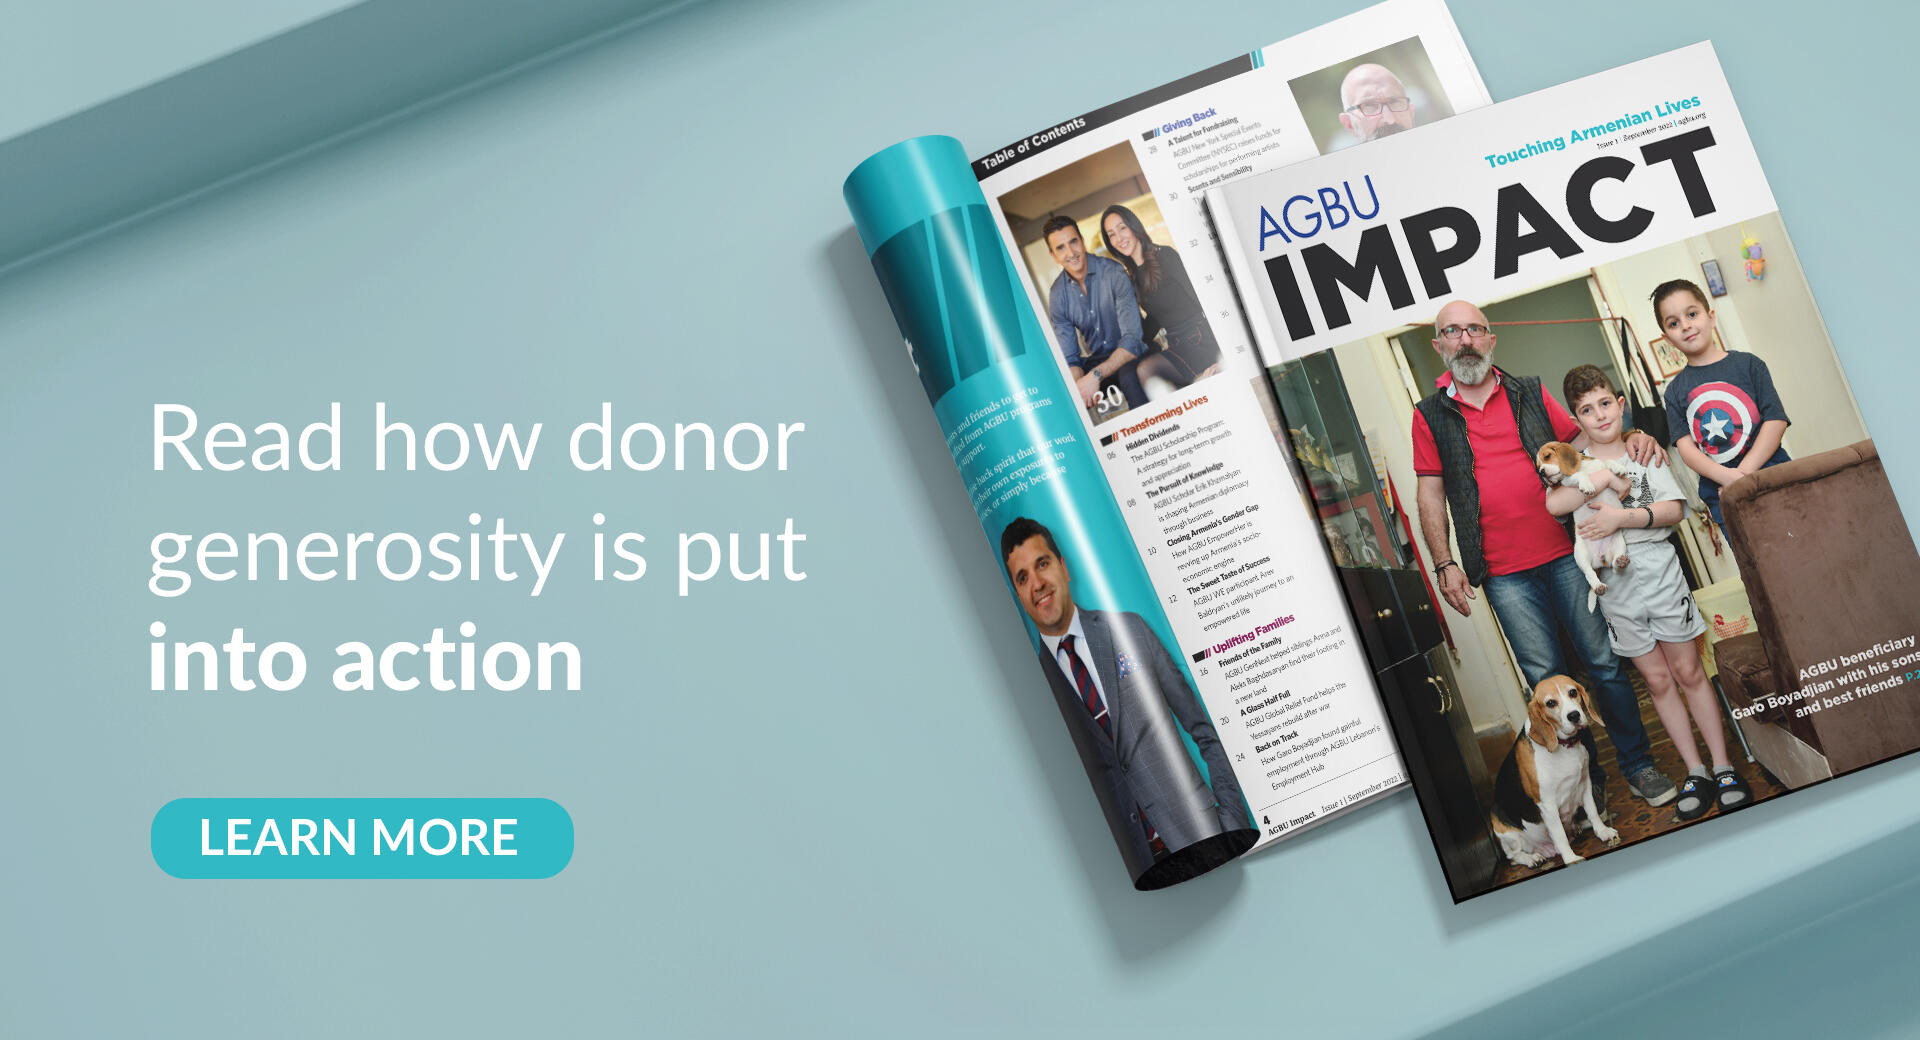 Read how donor generosity is put into action